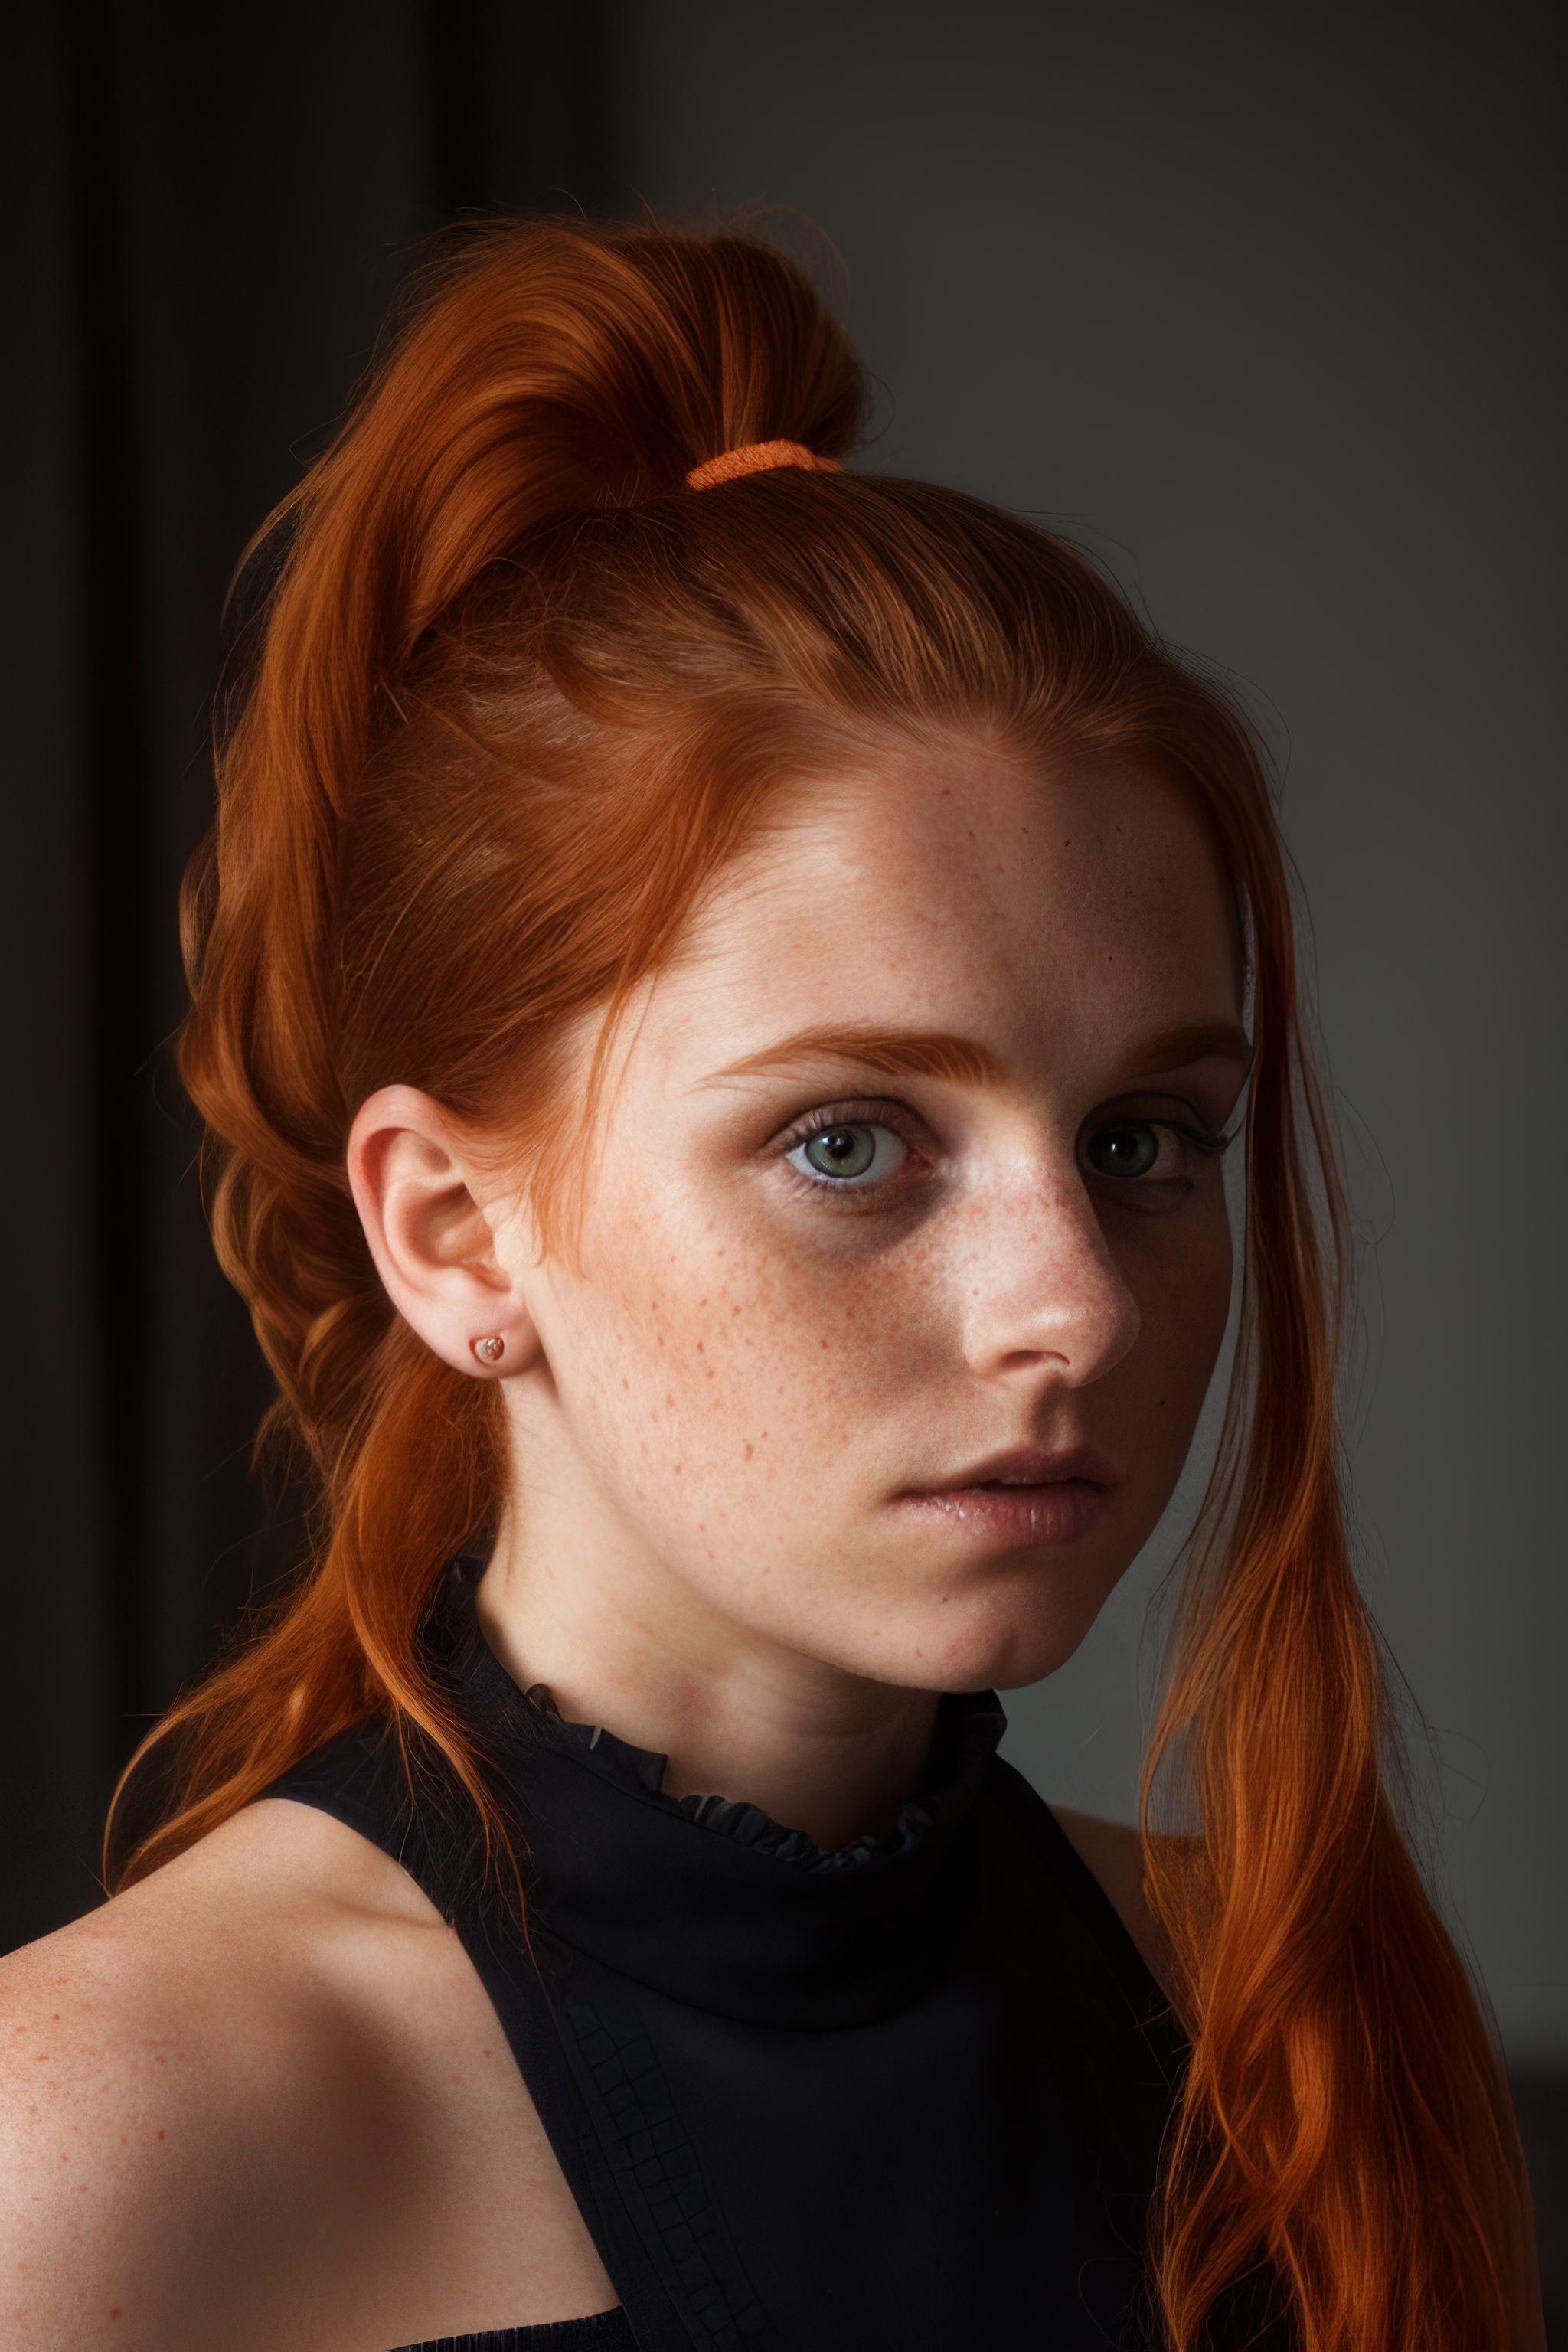 A teenage girl with bright red hair and a ponytail is looking directly at the camera.